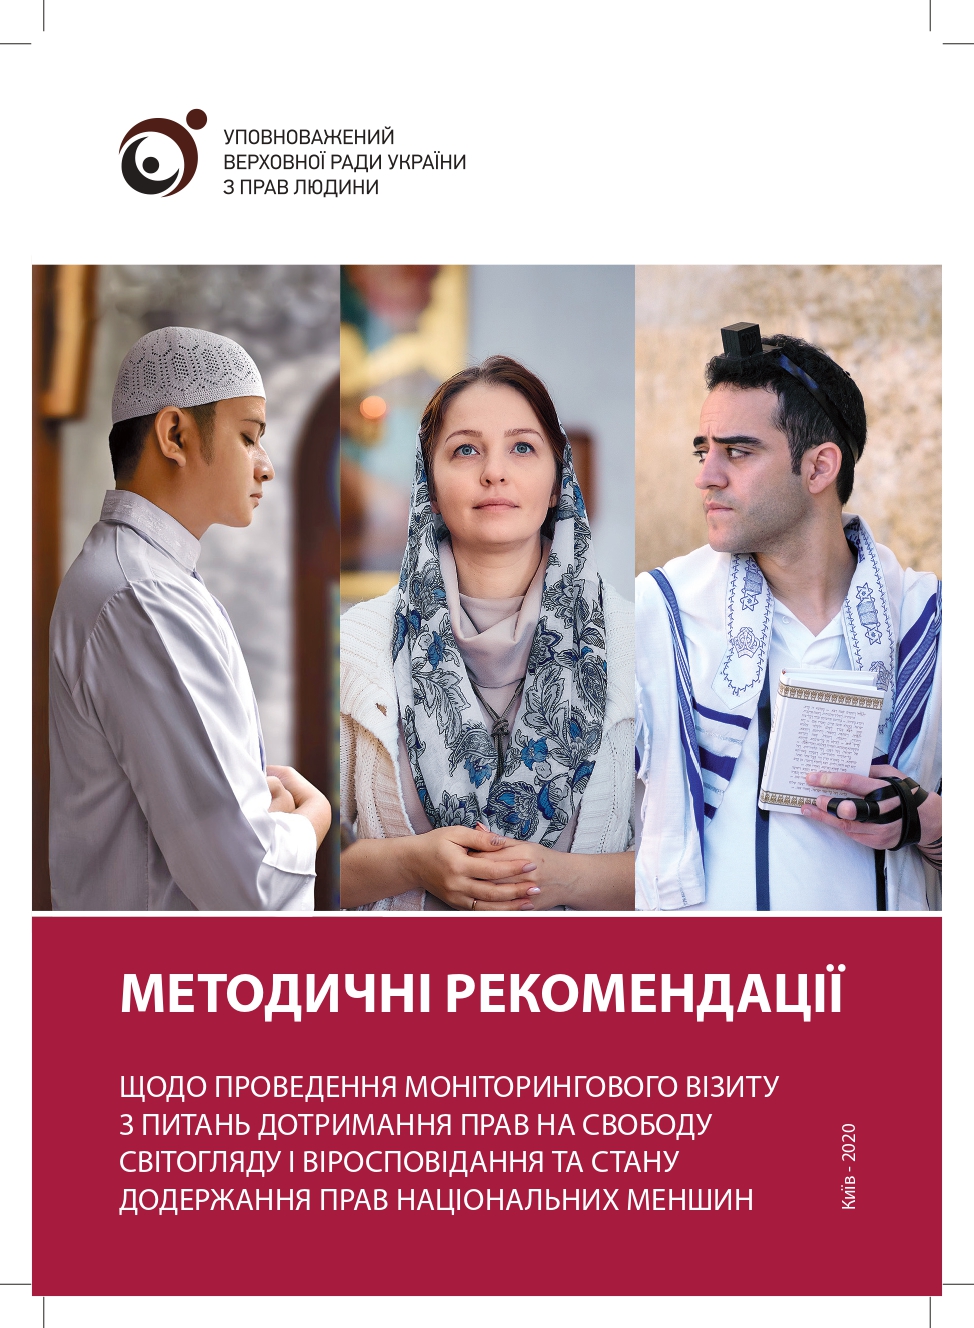 Methodical Recommendations on Conducting a Monitoring Visit on Respect for Rights to Freedom of Conscience and Religion and State of Respect of the National Minorities Rights